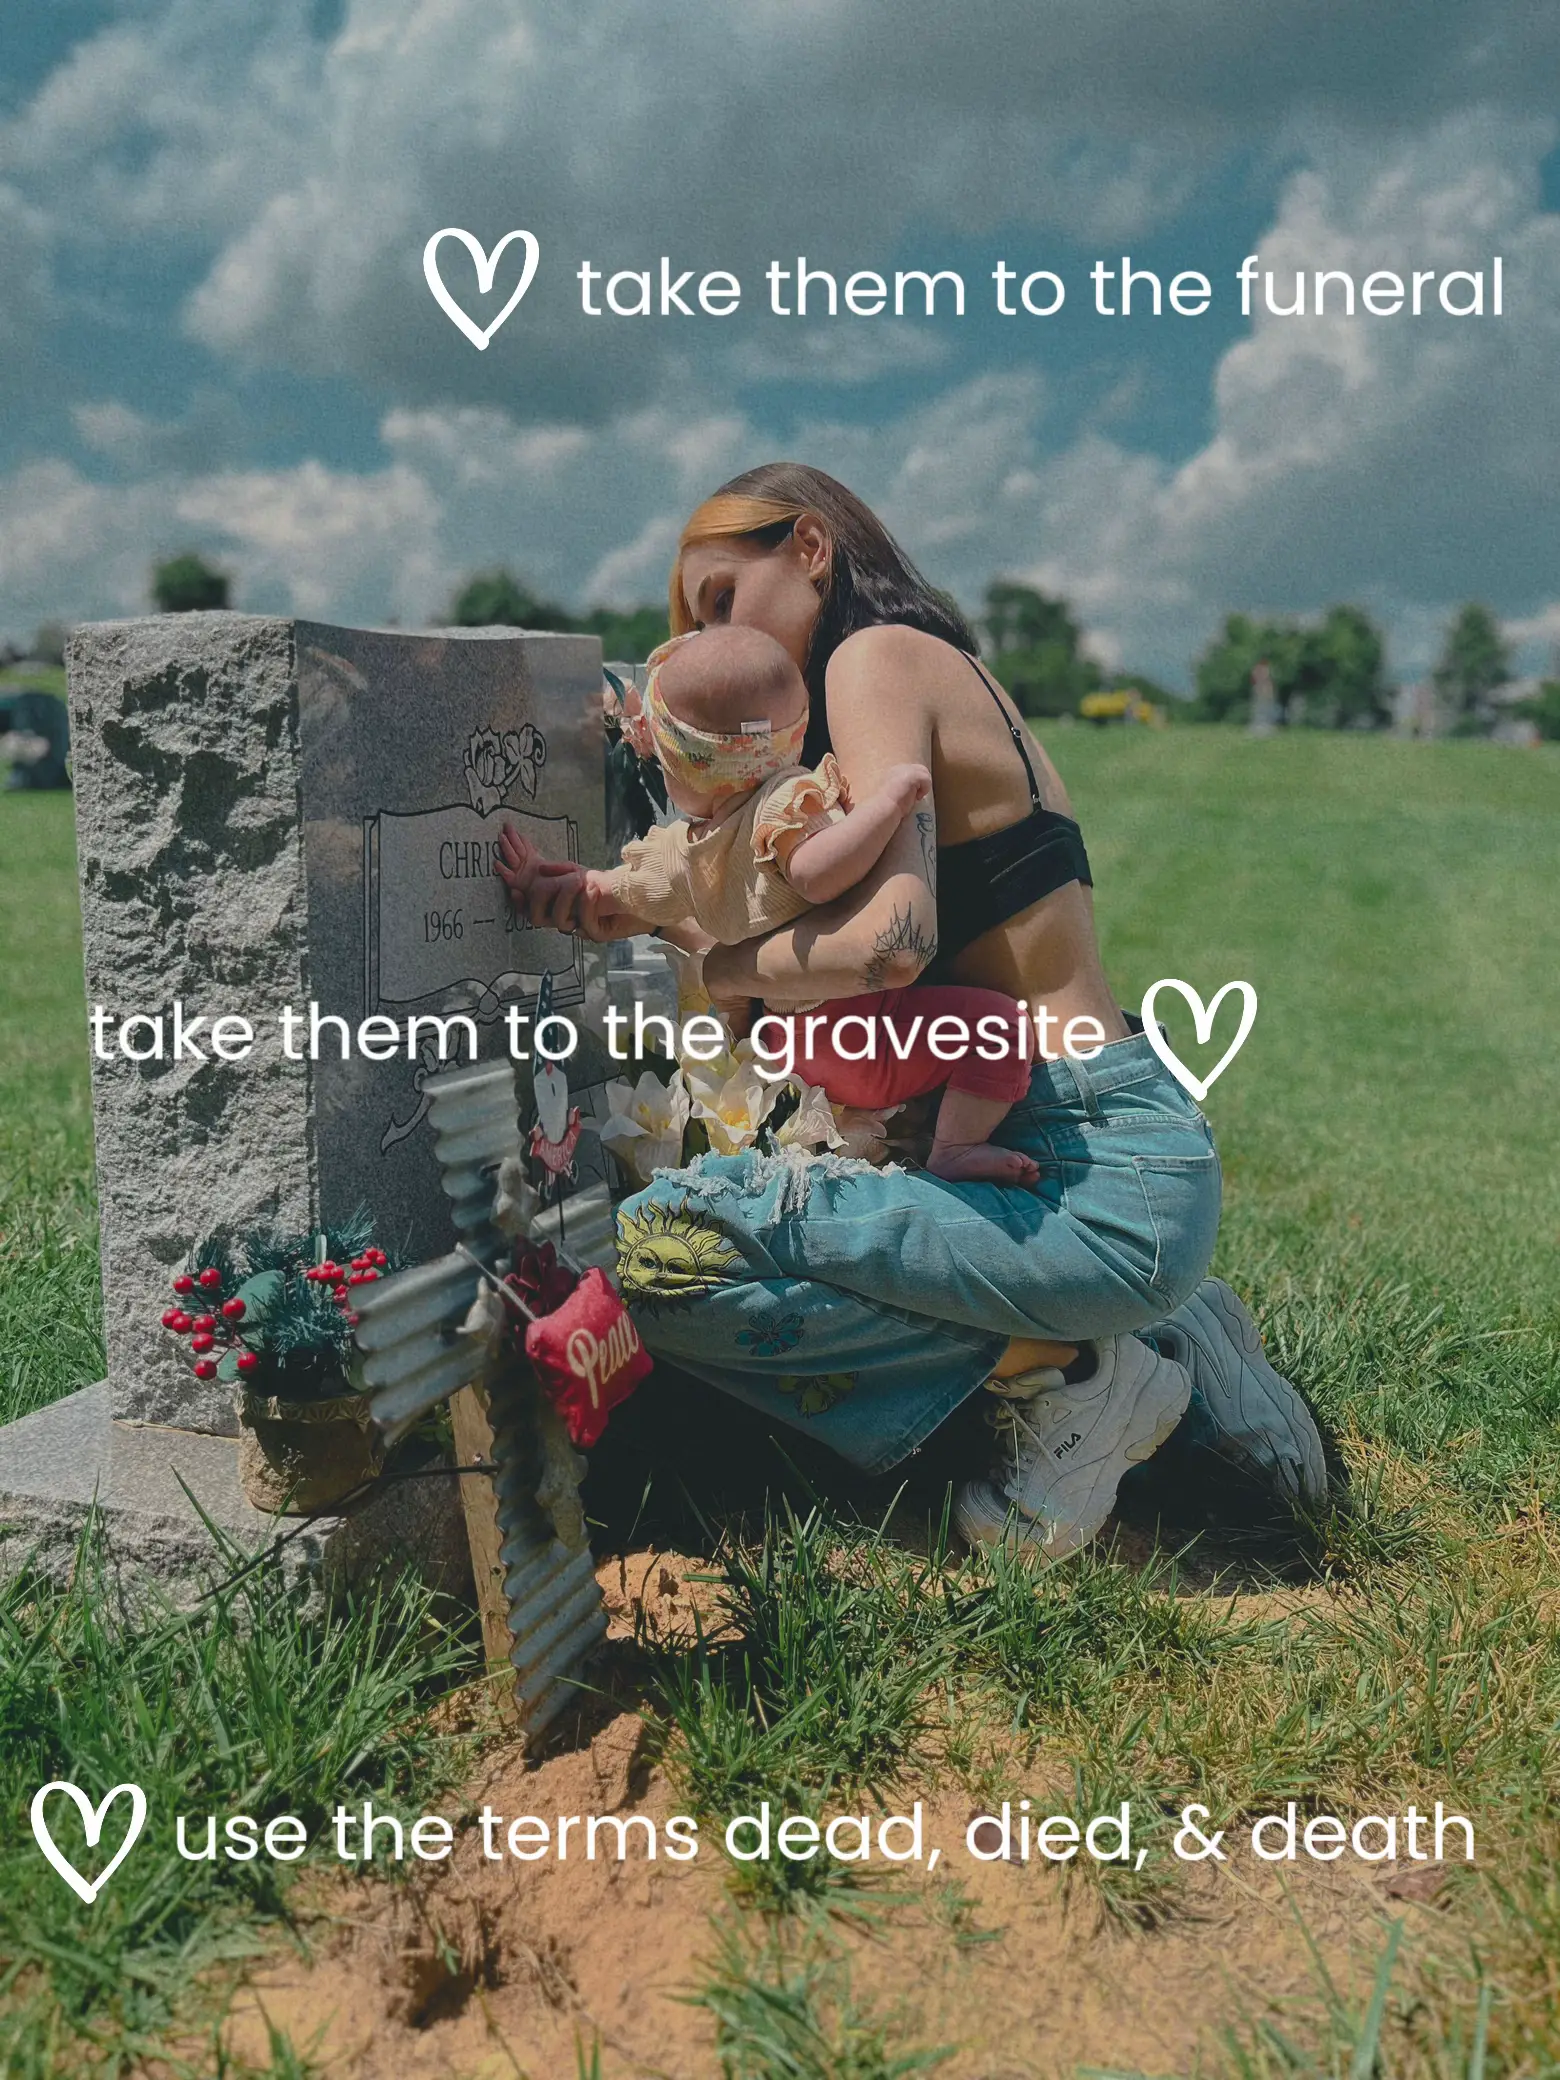  A woman is sitting in front of a gravesite, holding a baby.